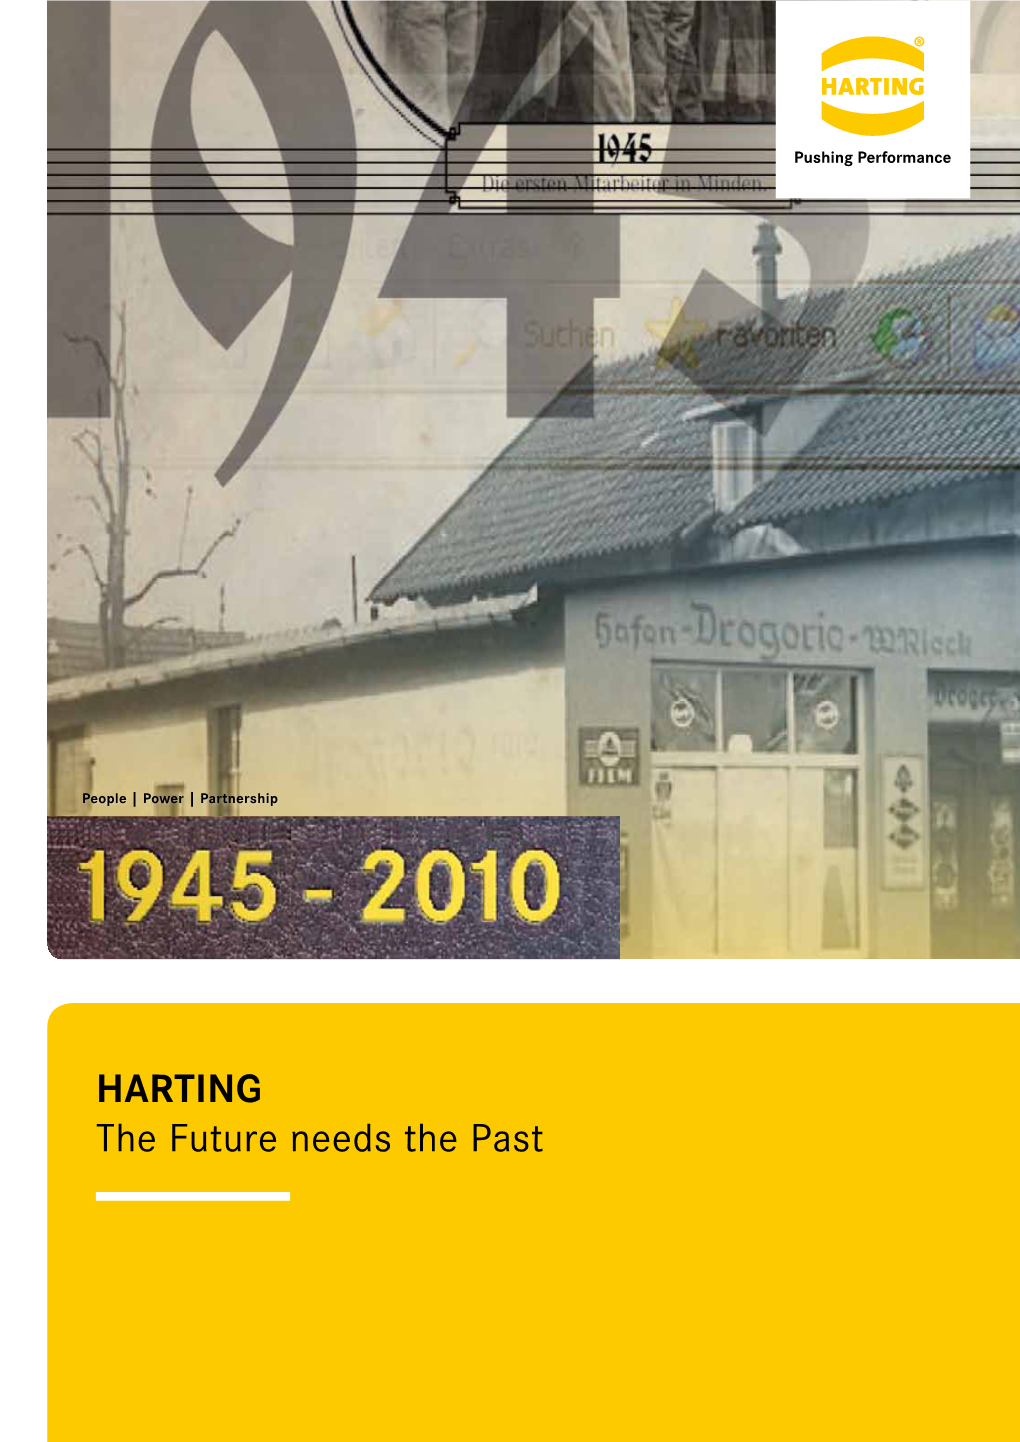 HARTING the Future Needs the Past We Want to Shape the Future with Technologies for People